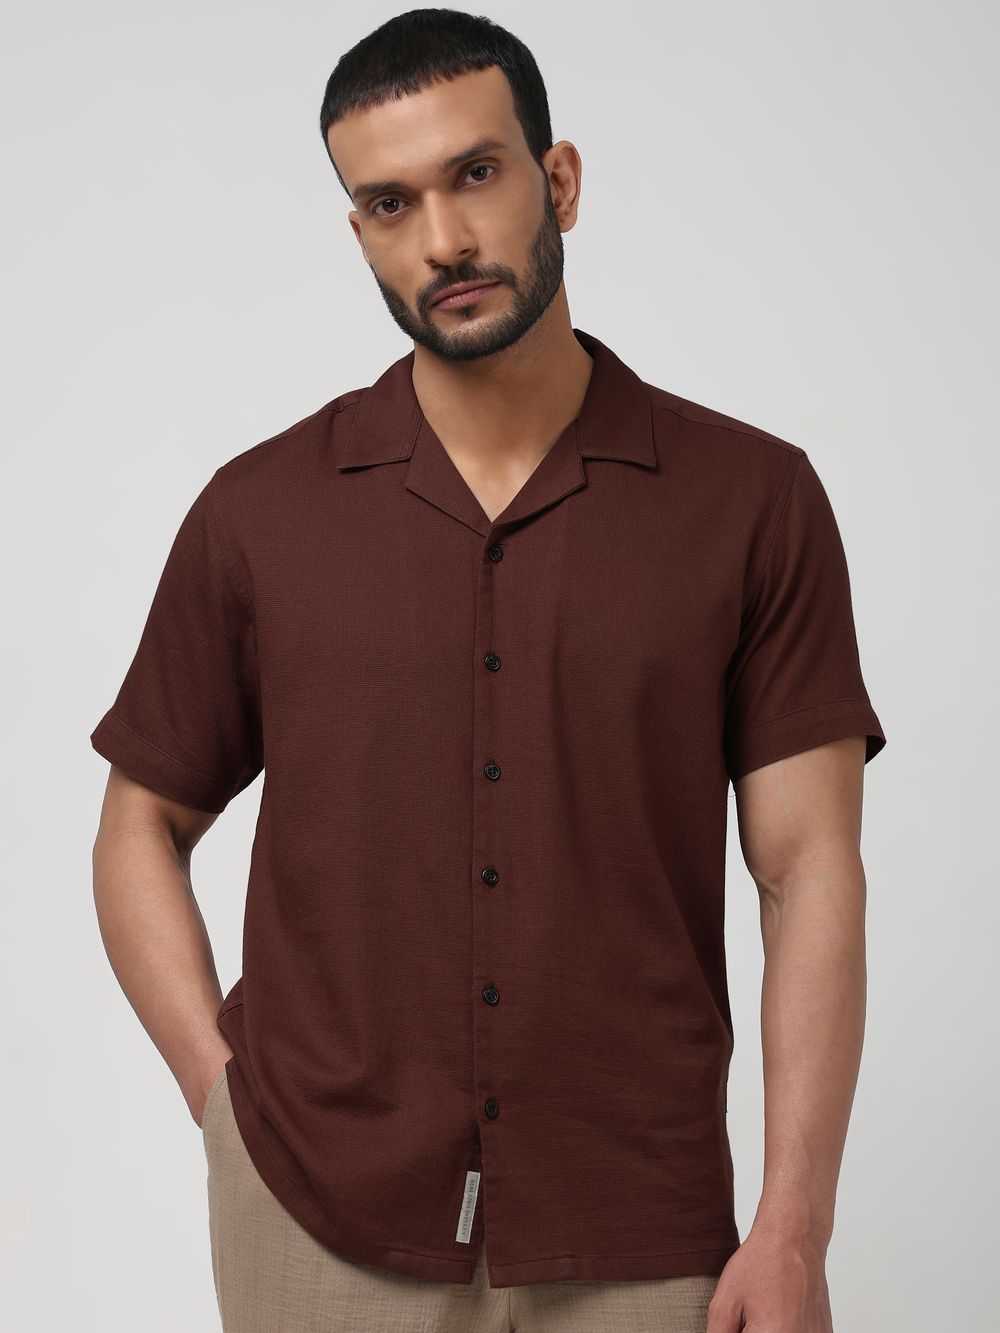 Rust Textured Plain Relaxed Fit Casual Shirt